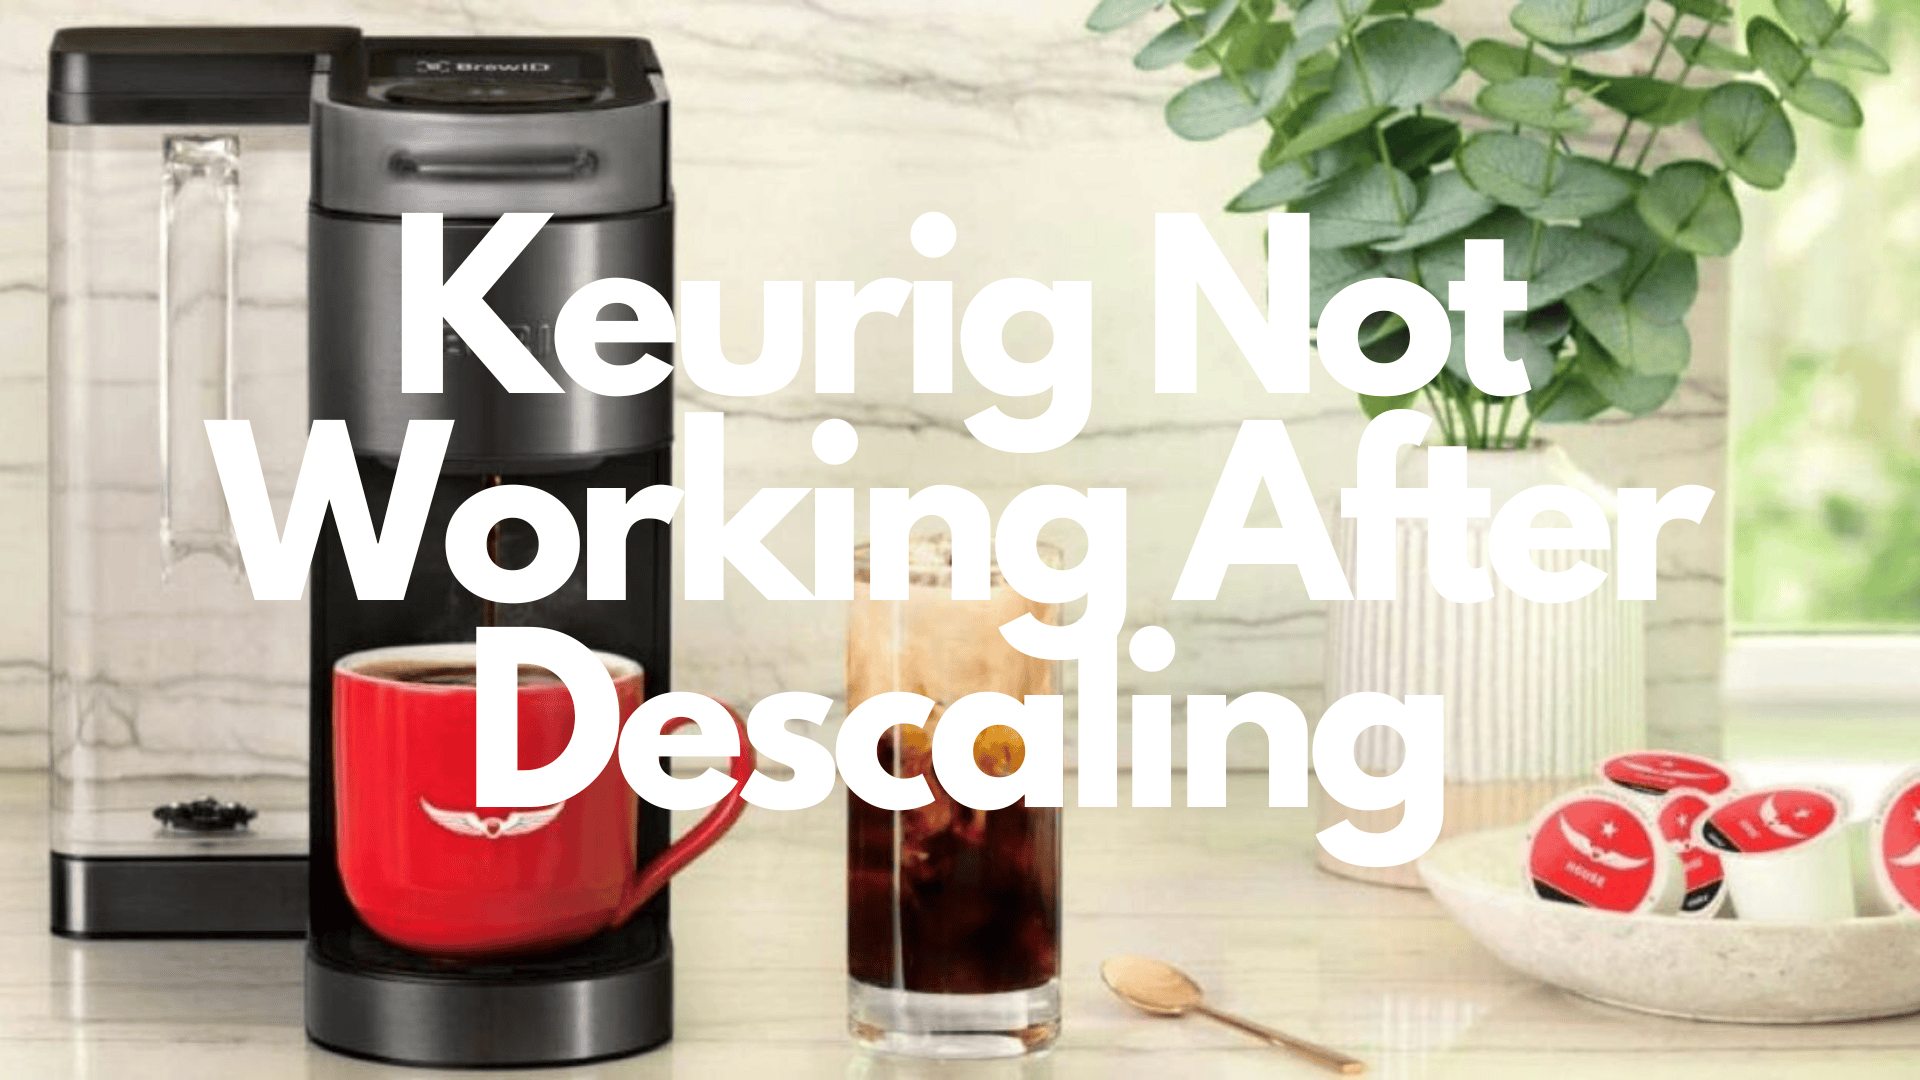 How to Clean a Keurig Coffee Maker - Tips to Cleaning a Keurig